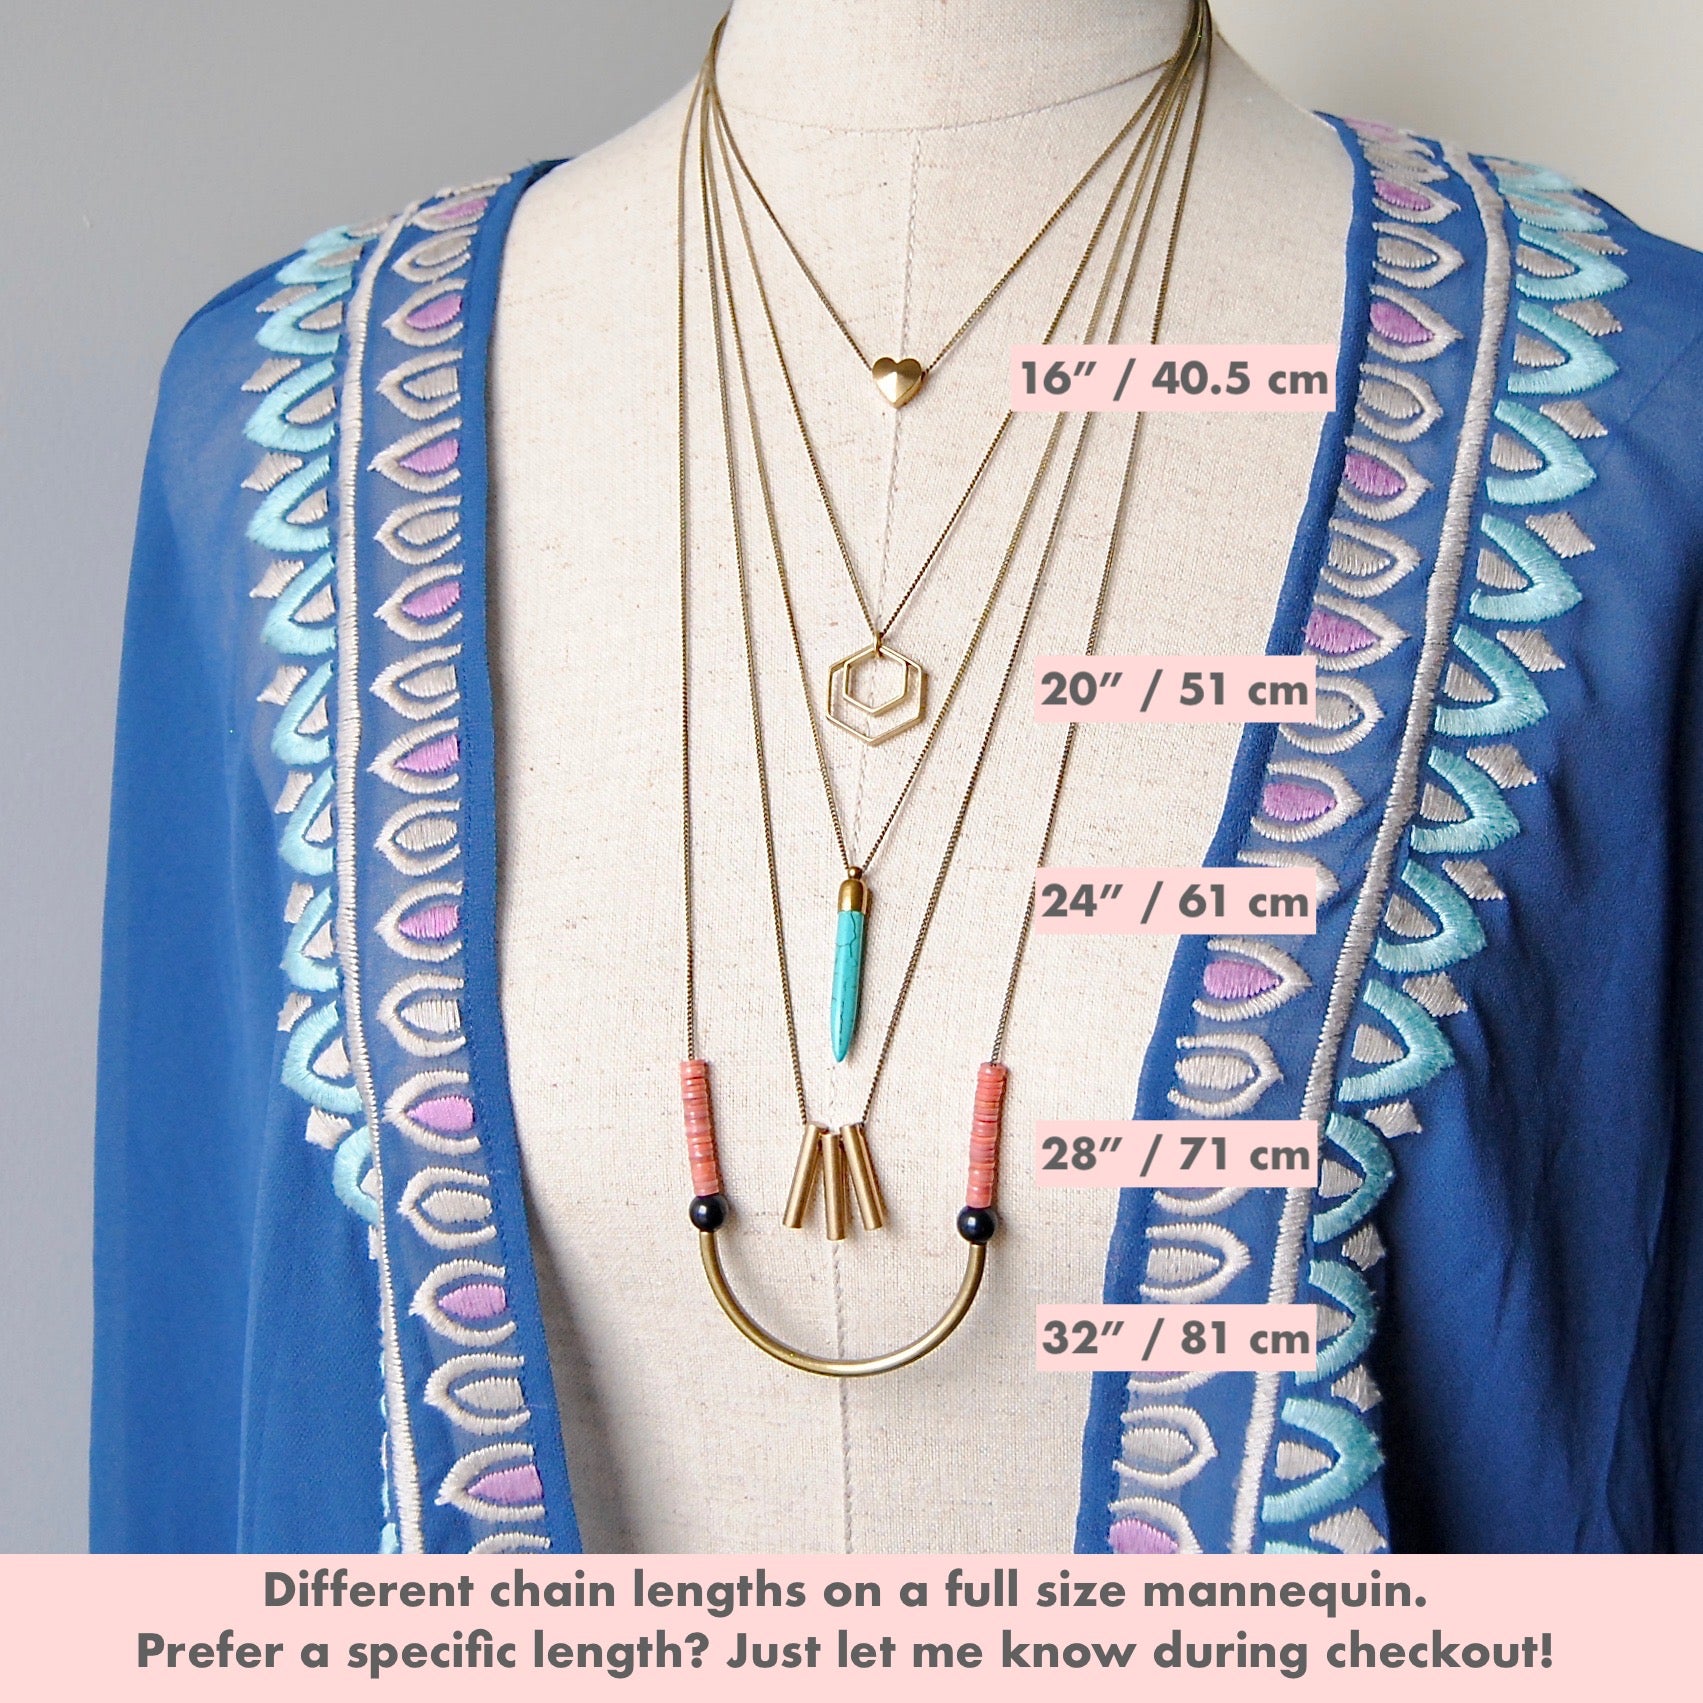 NECKLACE LENGTH CHART